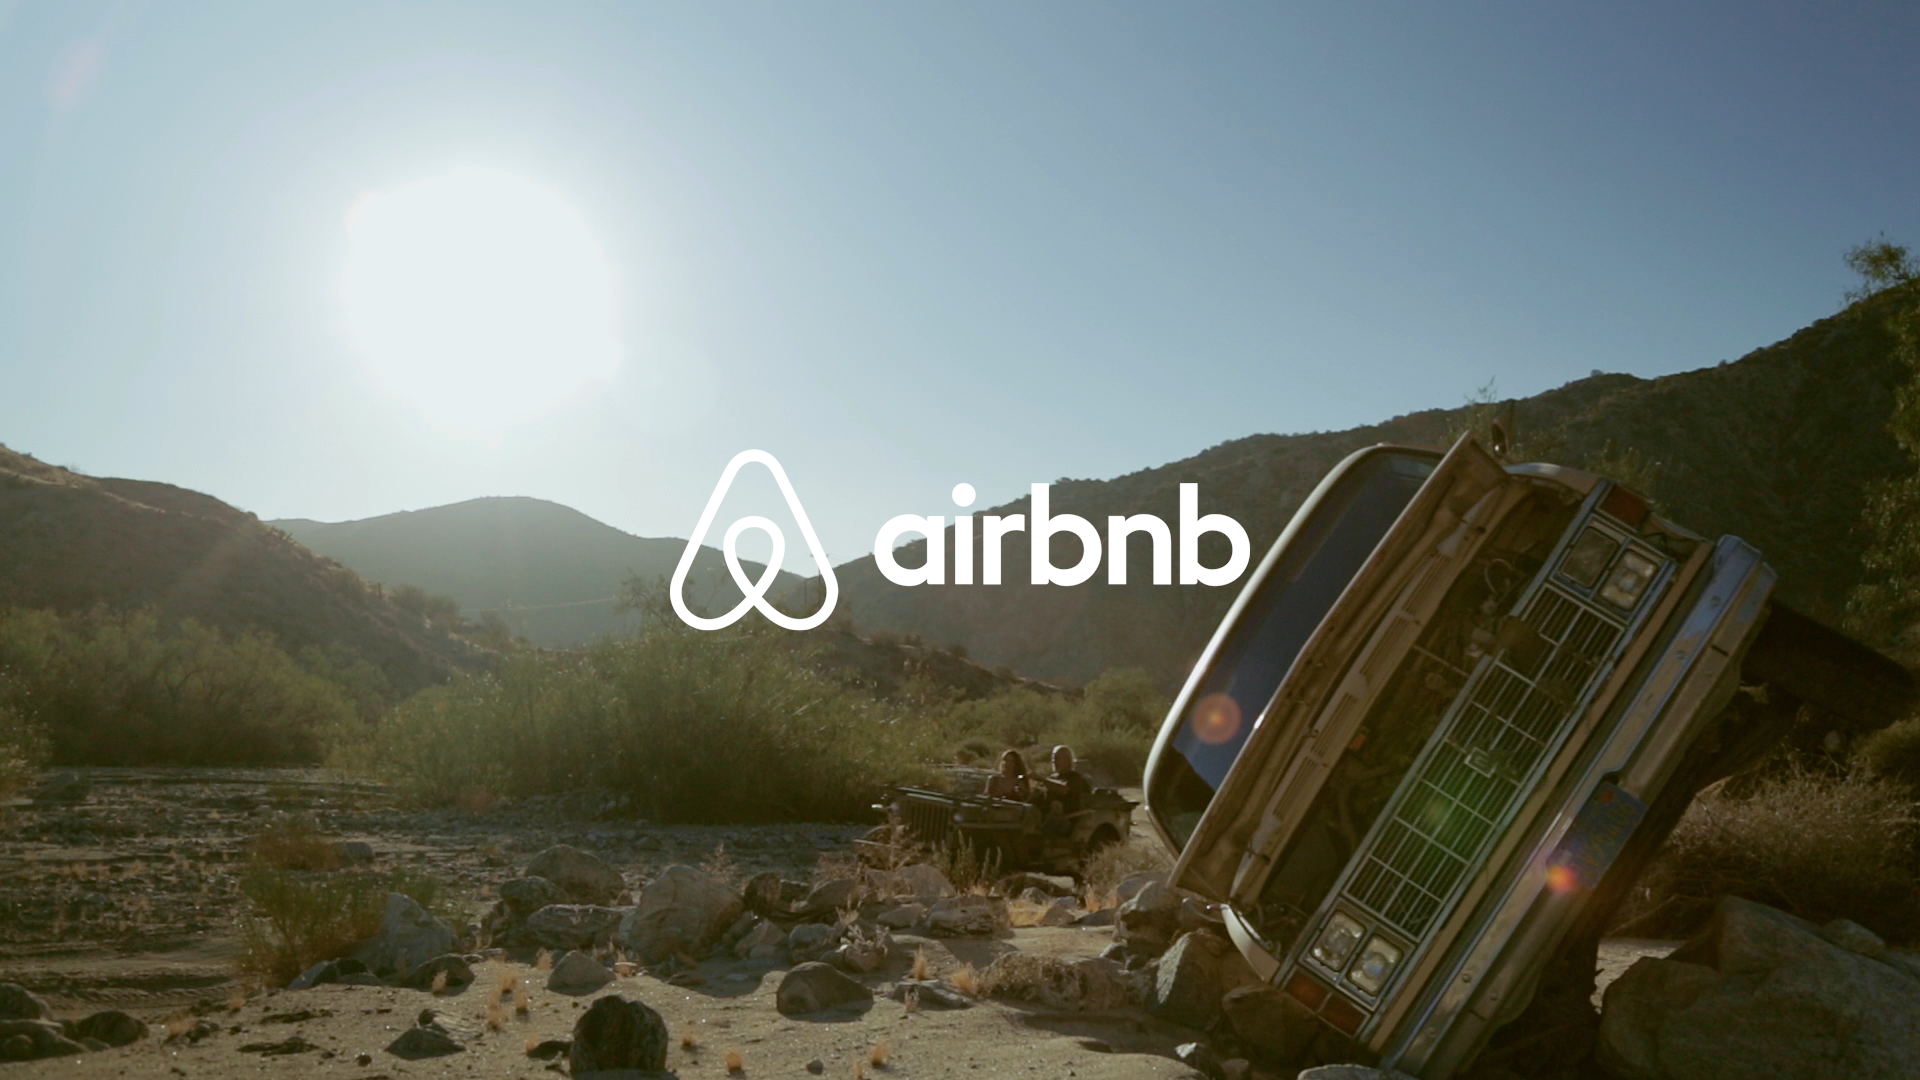 Airbnb logo on top of a picture of old truck in the desert